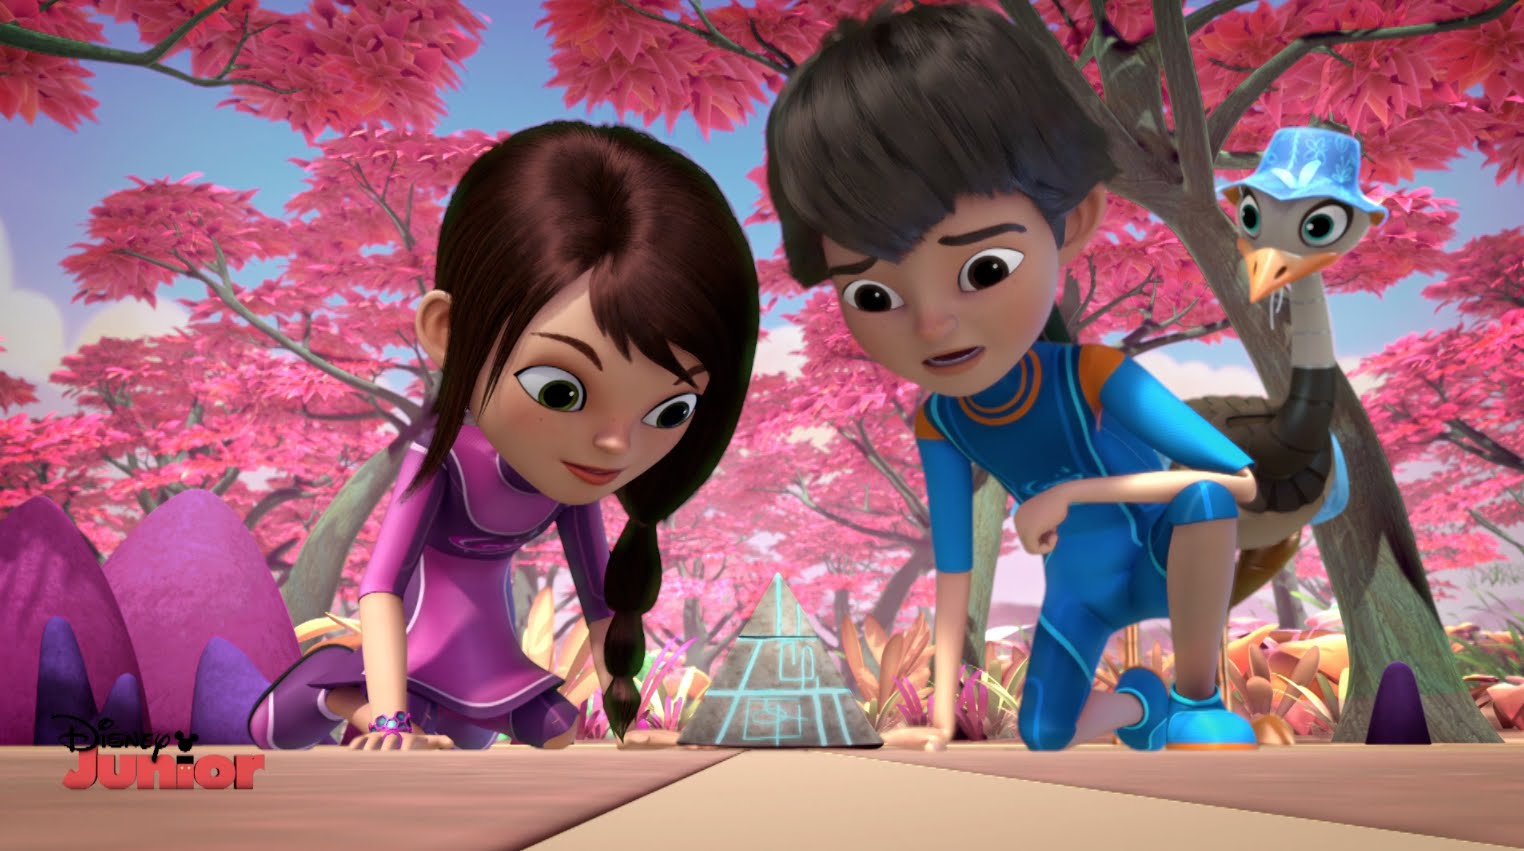 Miles From Tomorrowland wallpaper, TV Show, HQ Miles From Tomorrowland pictureK Wallpaper 2019